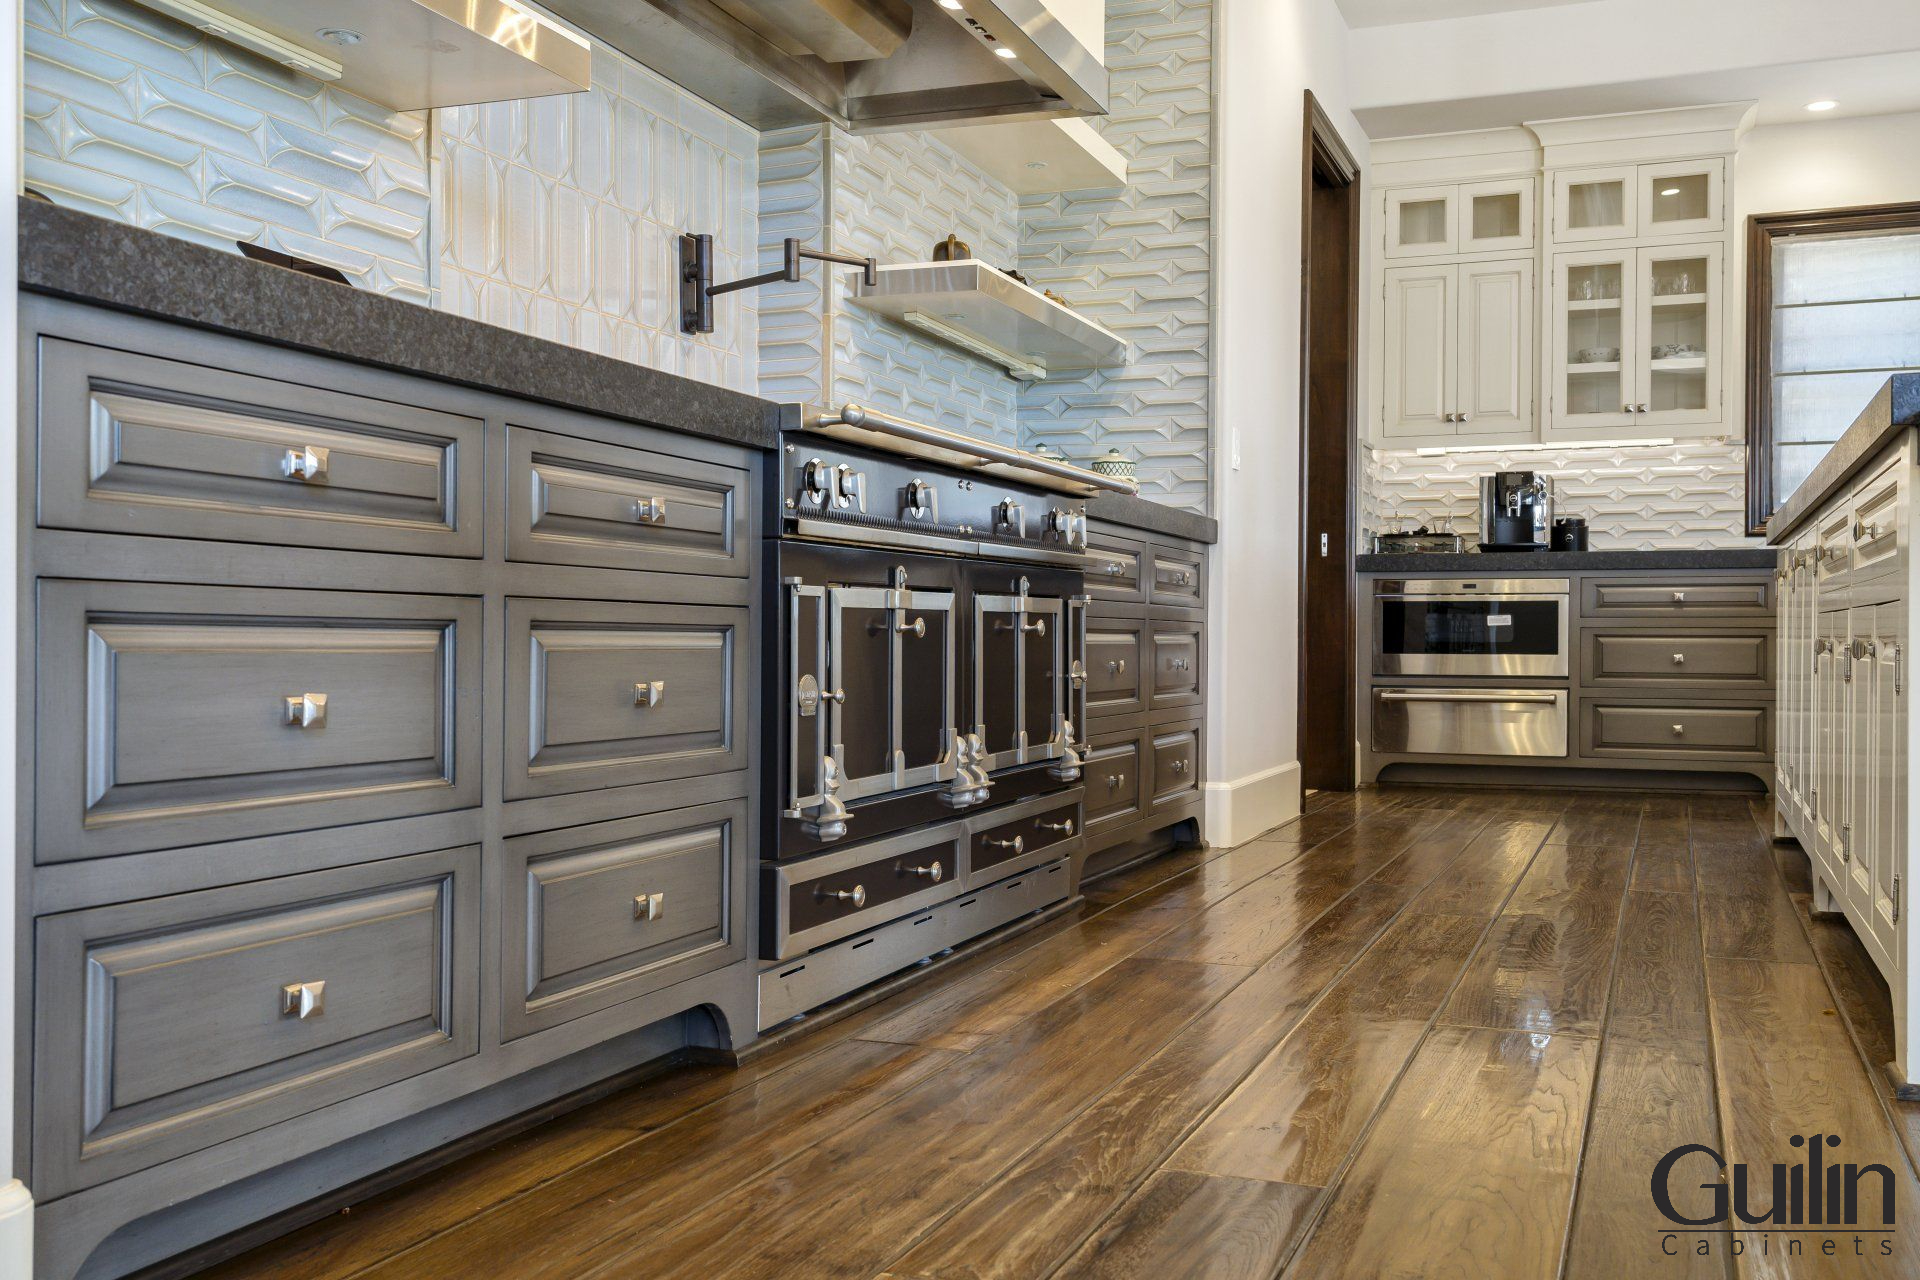 The traditional style kitchen offers a wide range of materials and textures for both classic and contemporary kitchens.